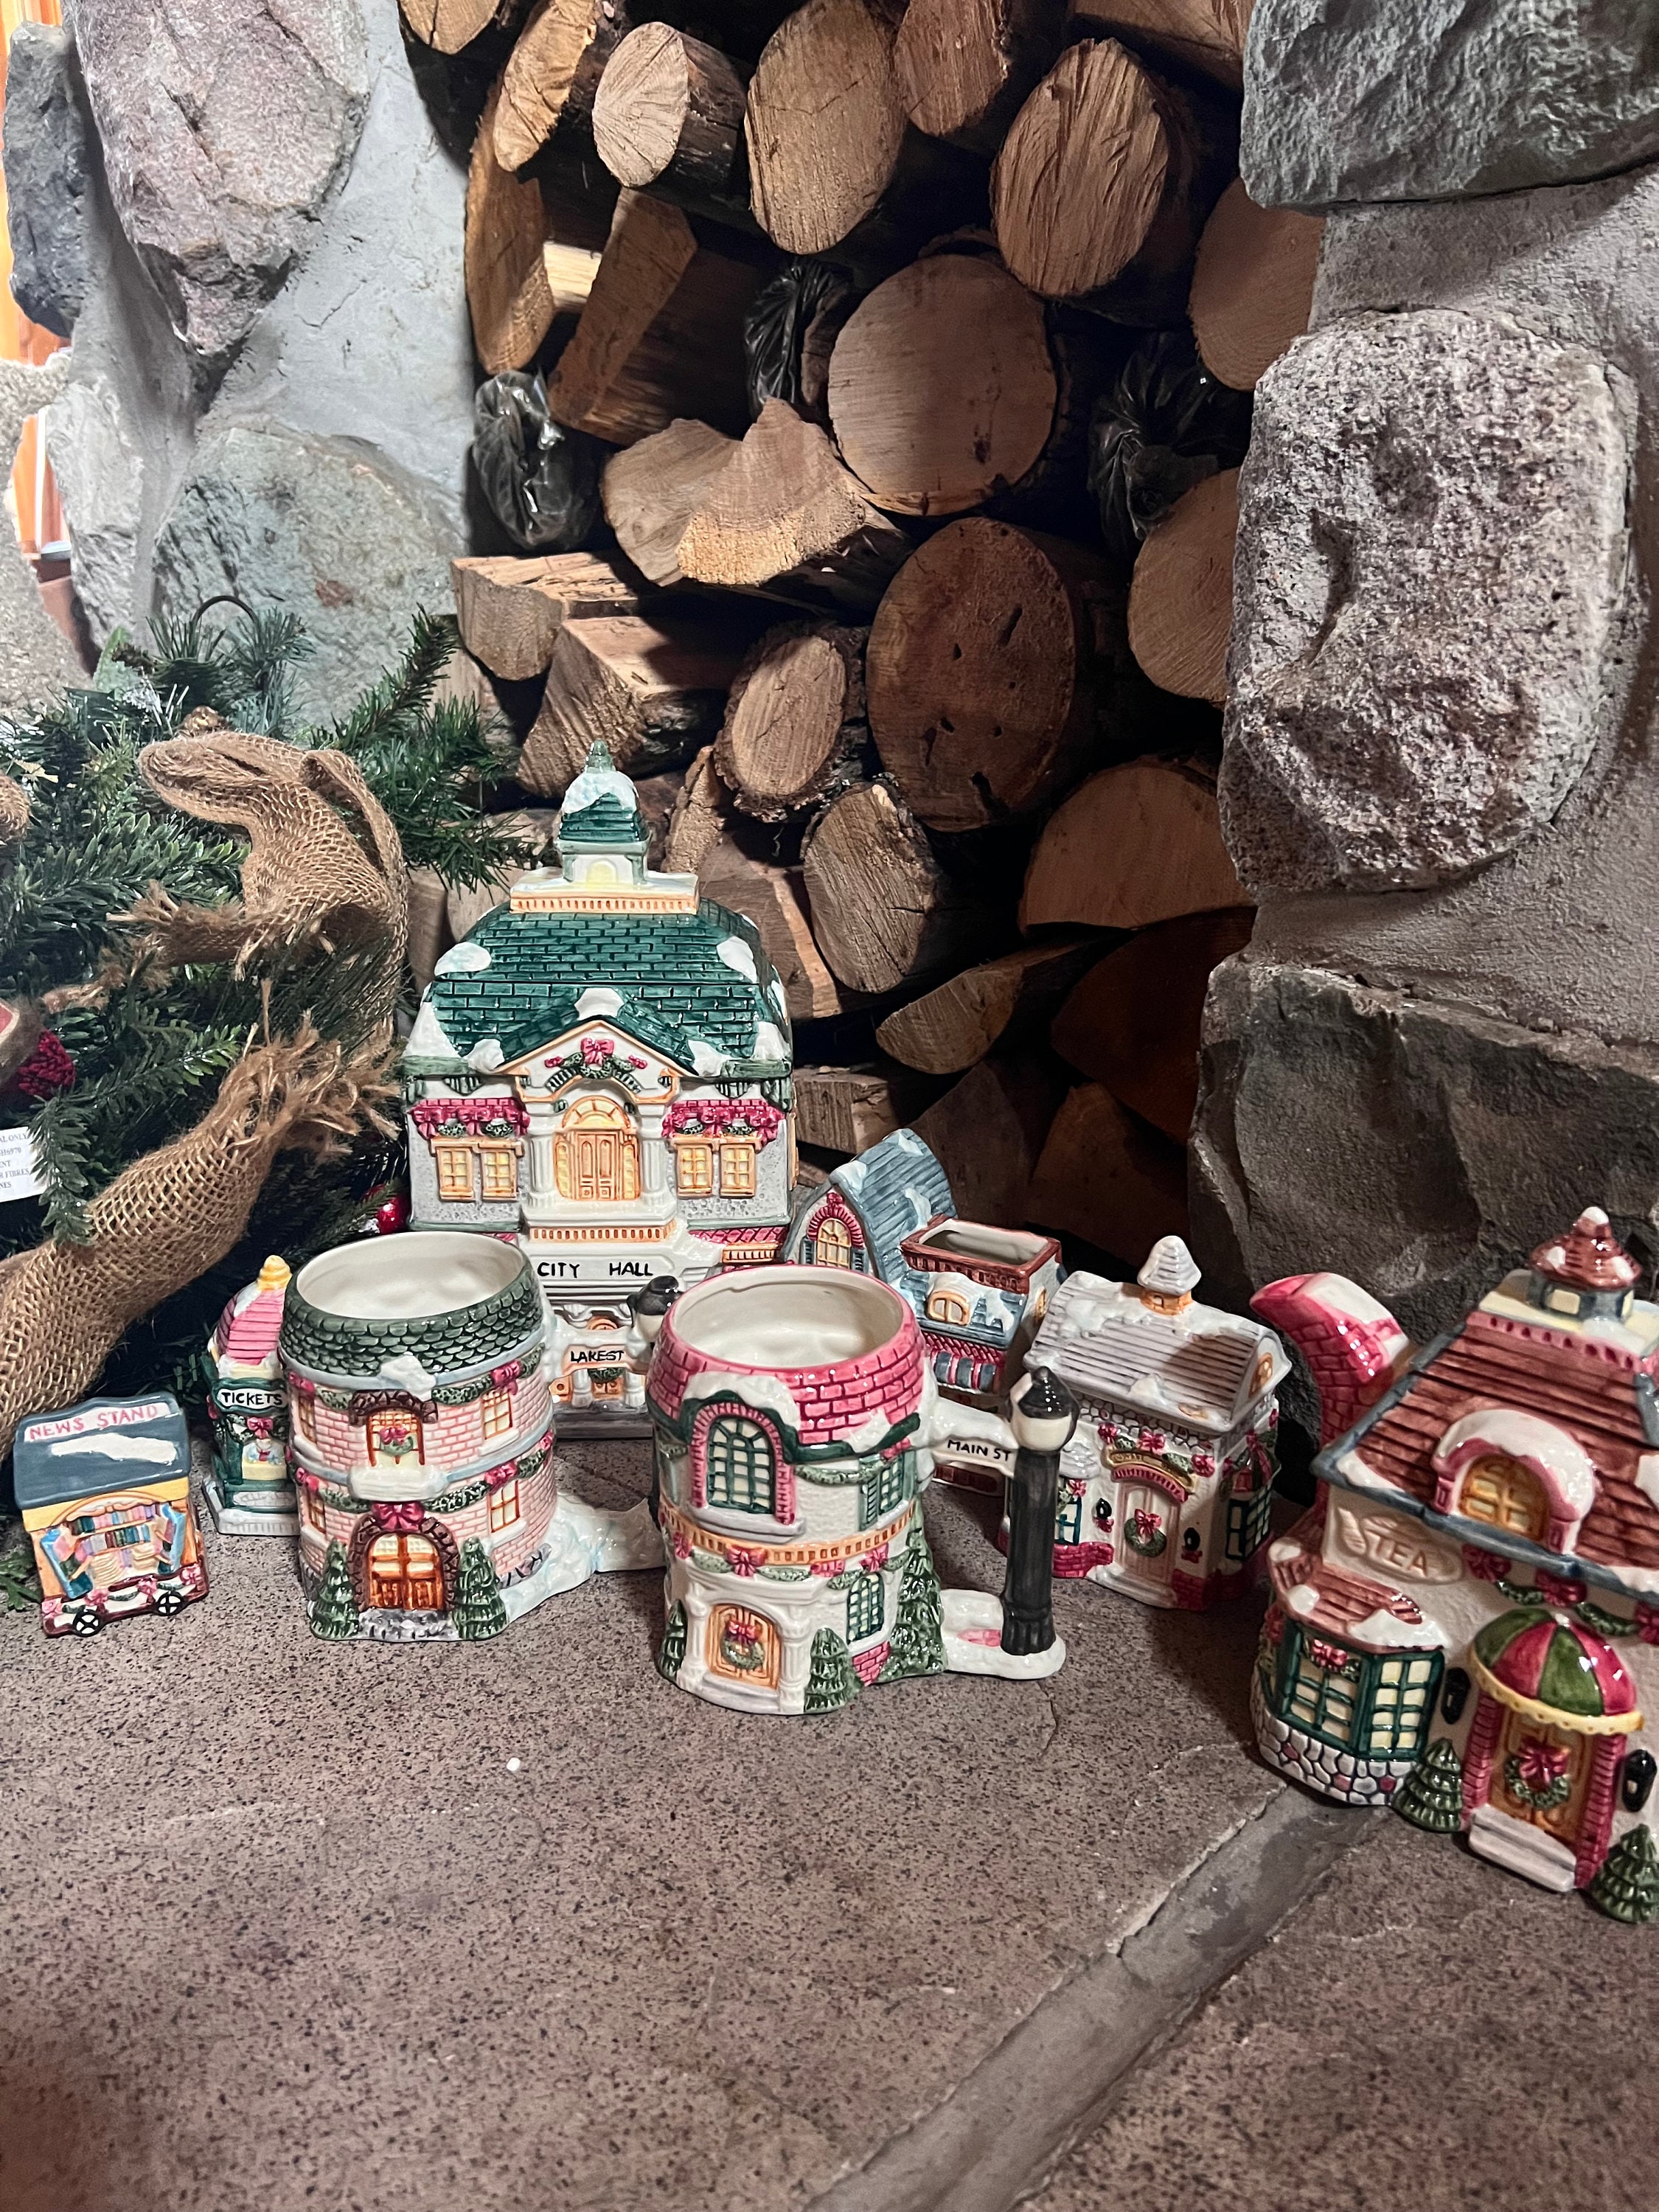 Vintage Ceramic Village Accessory - Mountains and Trees for Christmas –  Anything Discovered